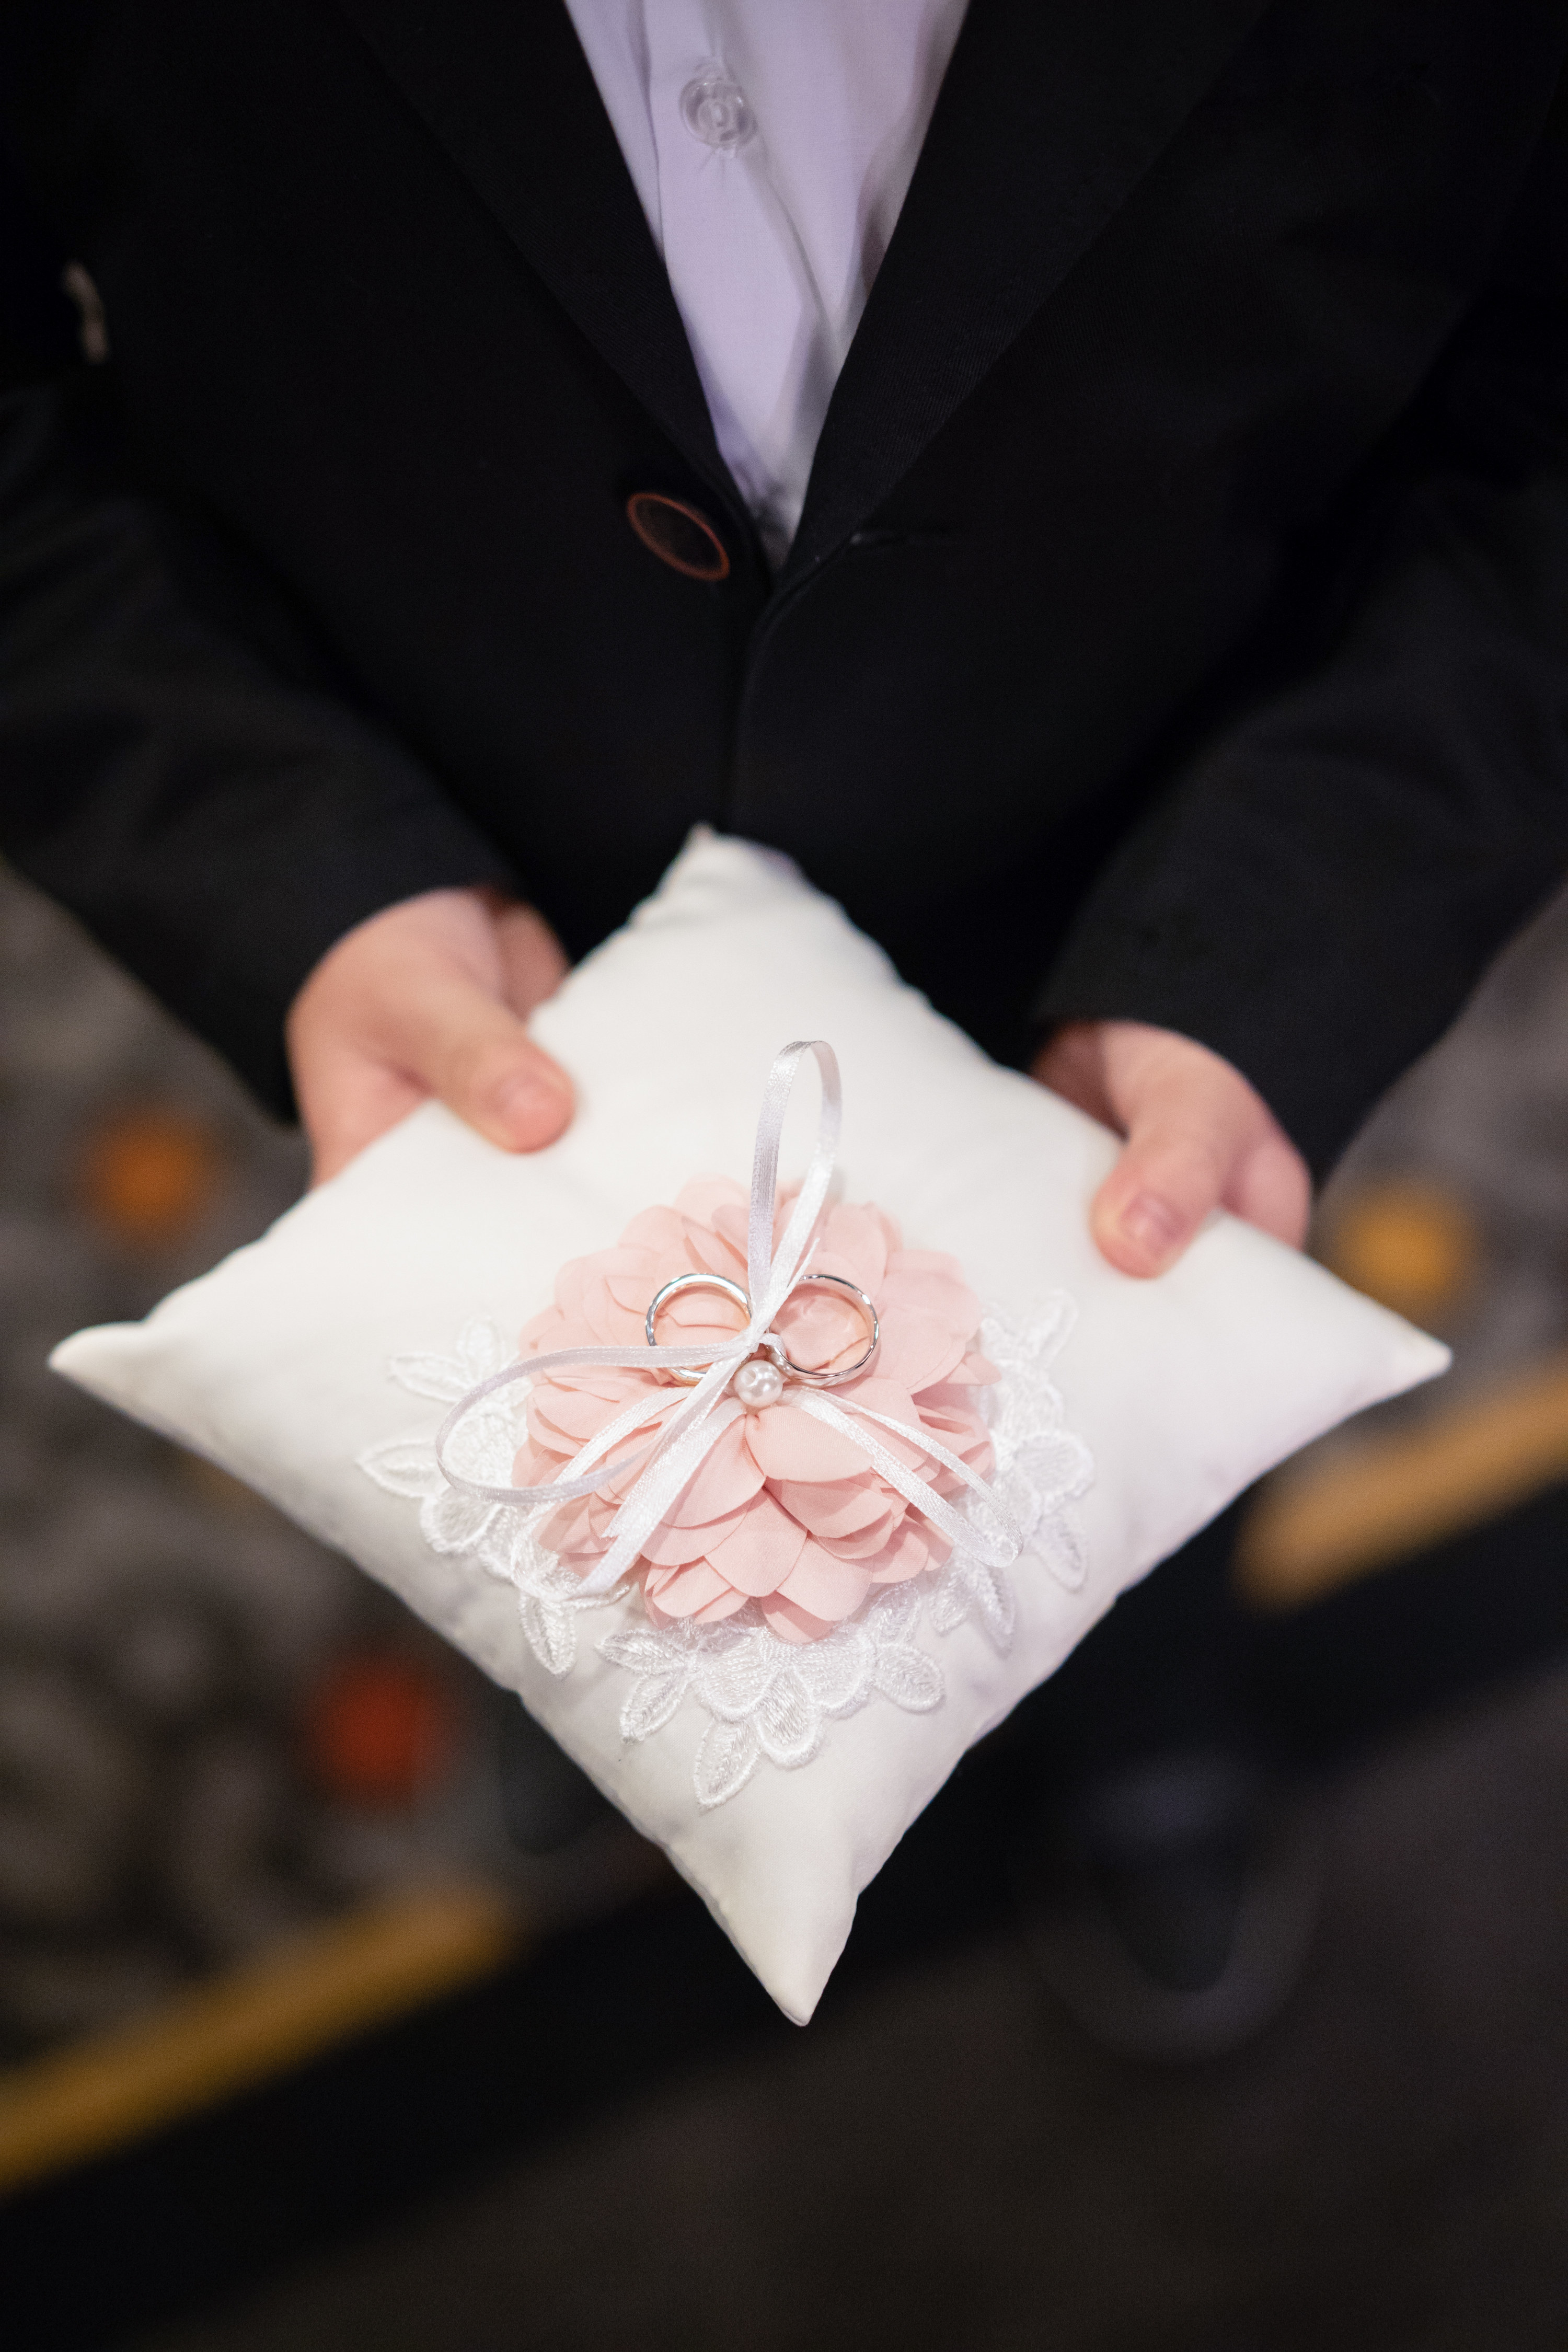 ring bearer holding pillow with rings